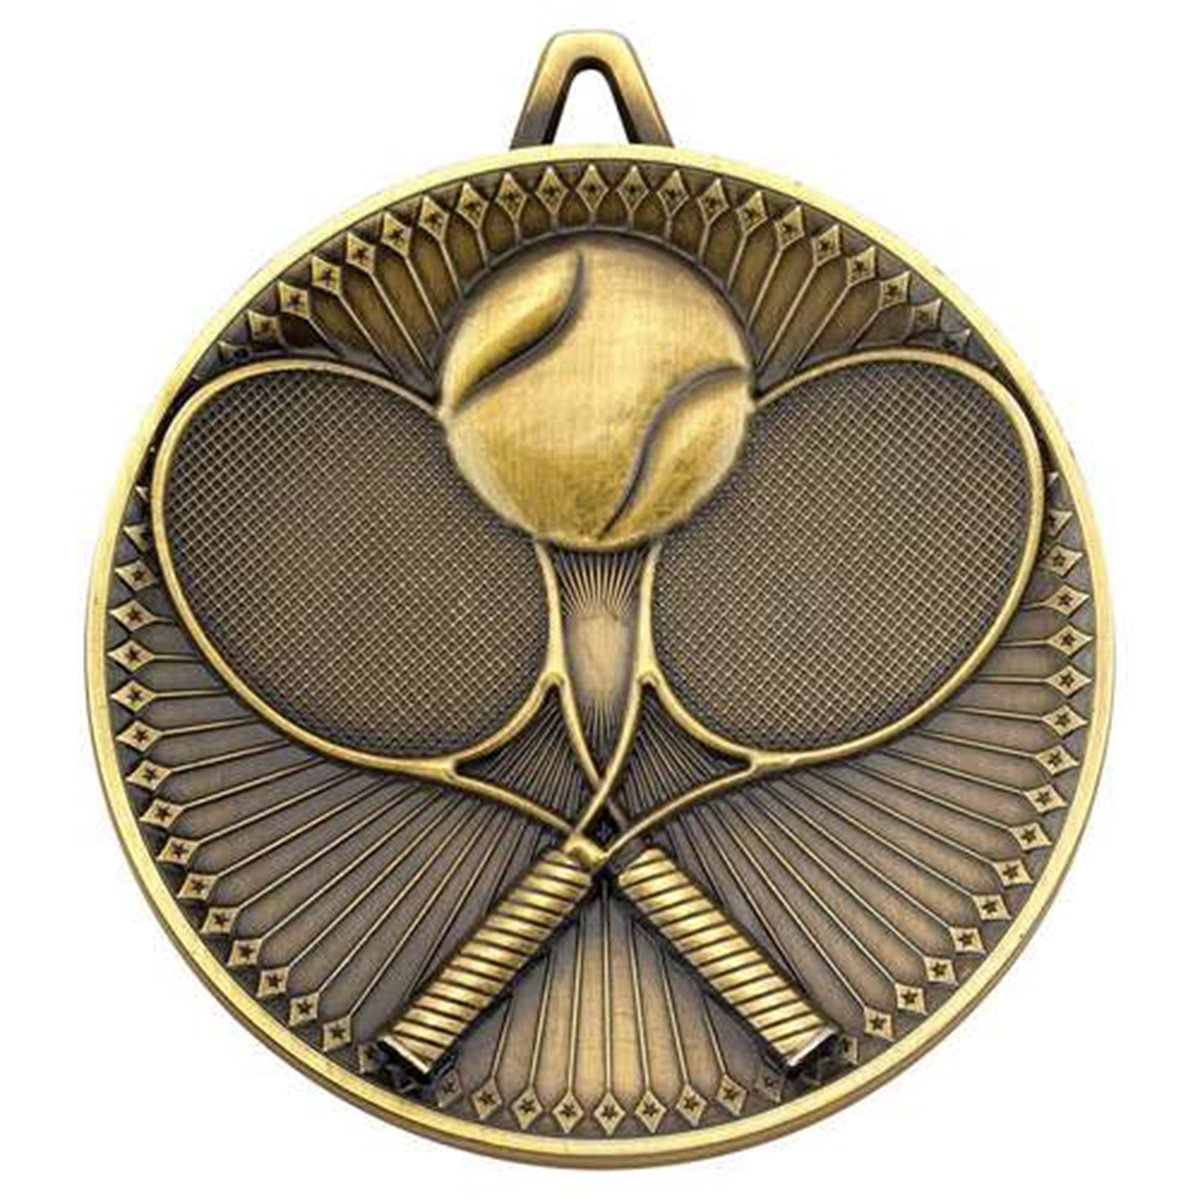 60mm Deluxe Tennis Medal DM05 in Gold, Silver & Bronze